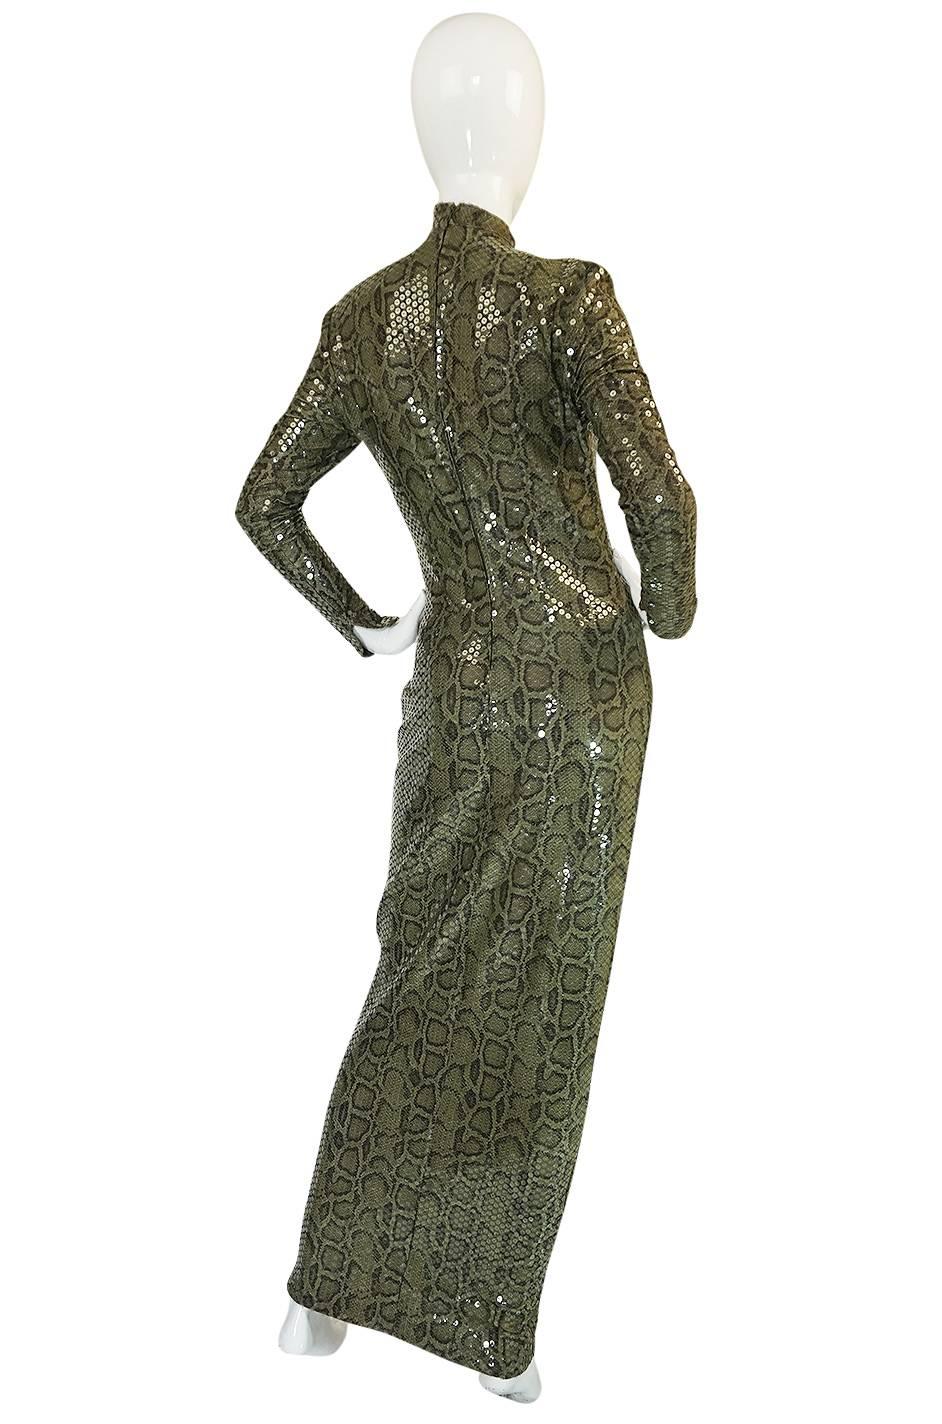 

This is a very rare version of the snakeskin dress from the 1983 collection. Mugler did two version of this dress - the Haute Couture version with the two slashes and the pret-a-porter version with the single slash. It was produced as a version